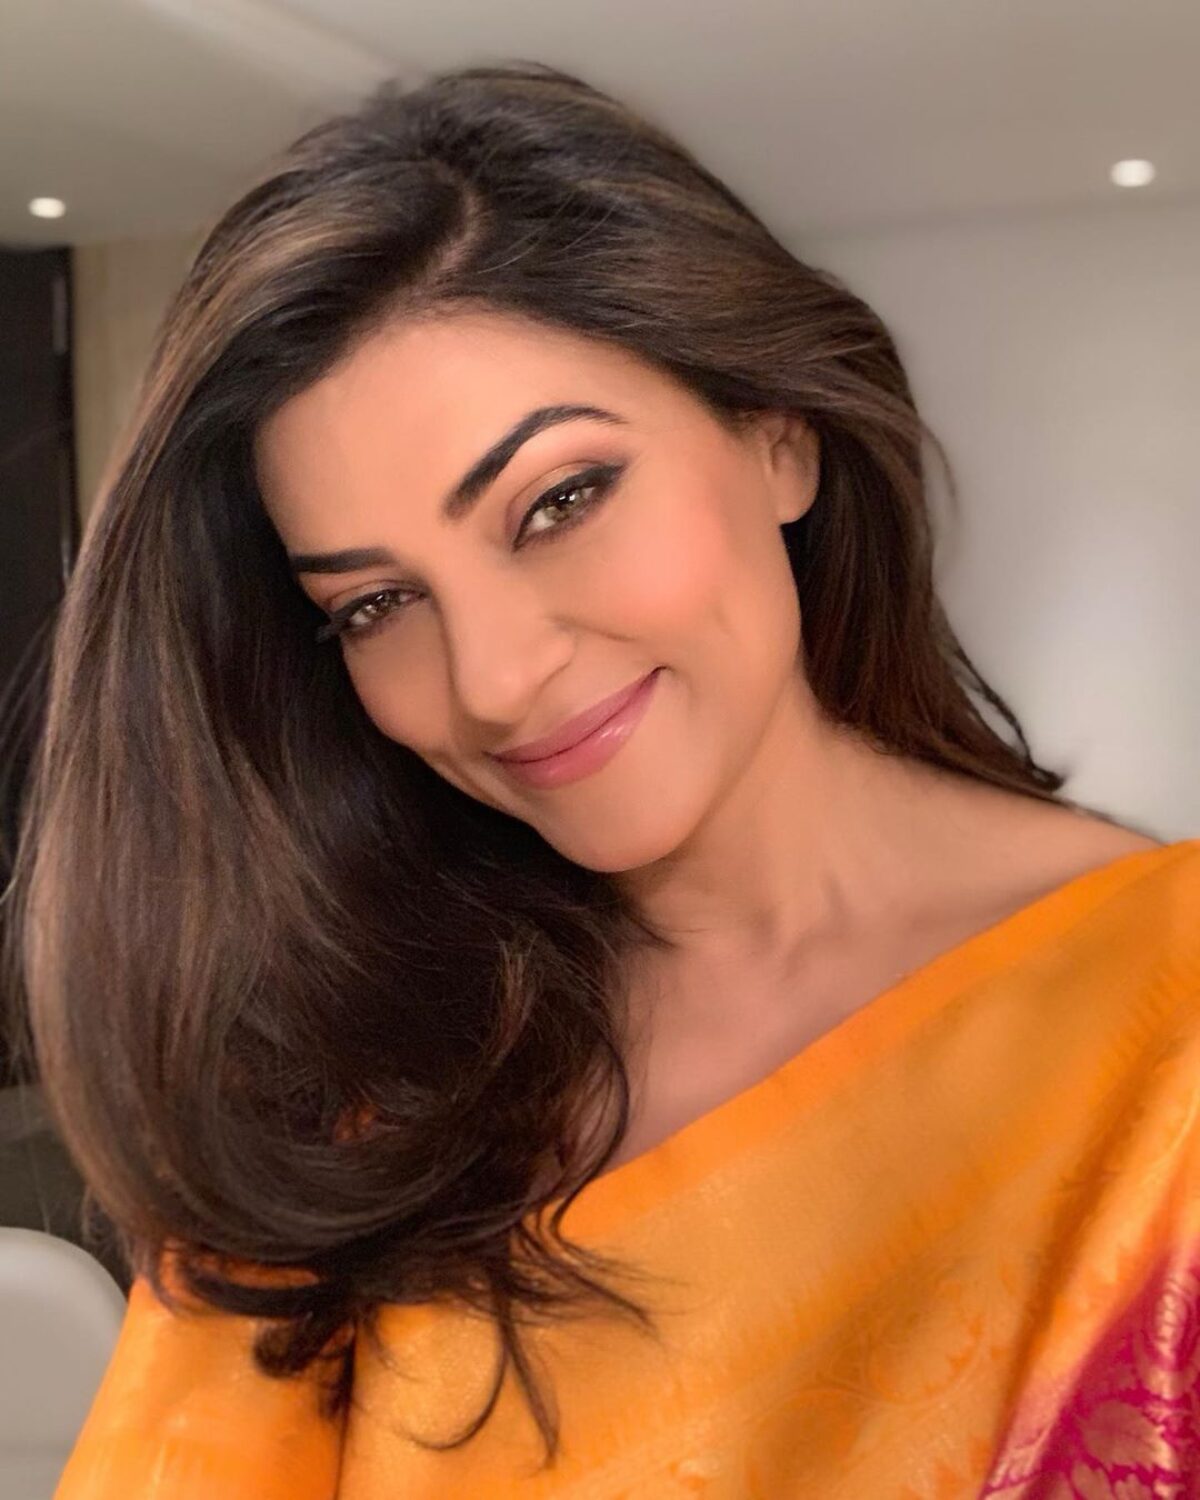 10 skincare and health tips you can learn from Sushmita Sen's Instagram |  Vogue India